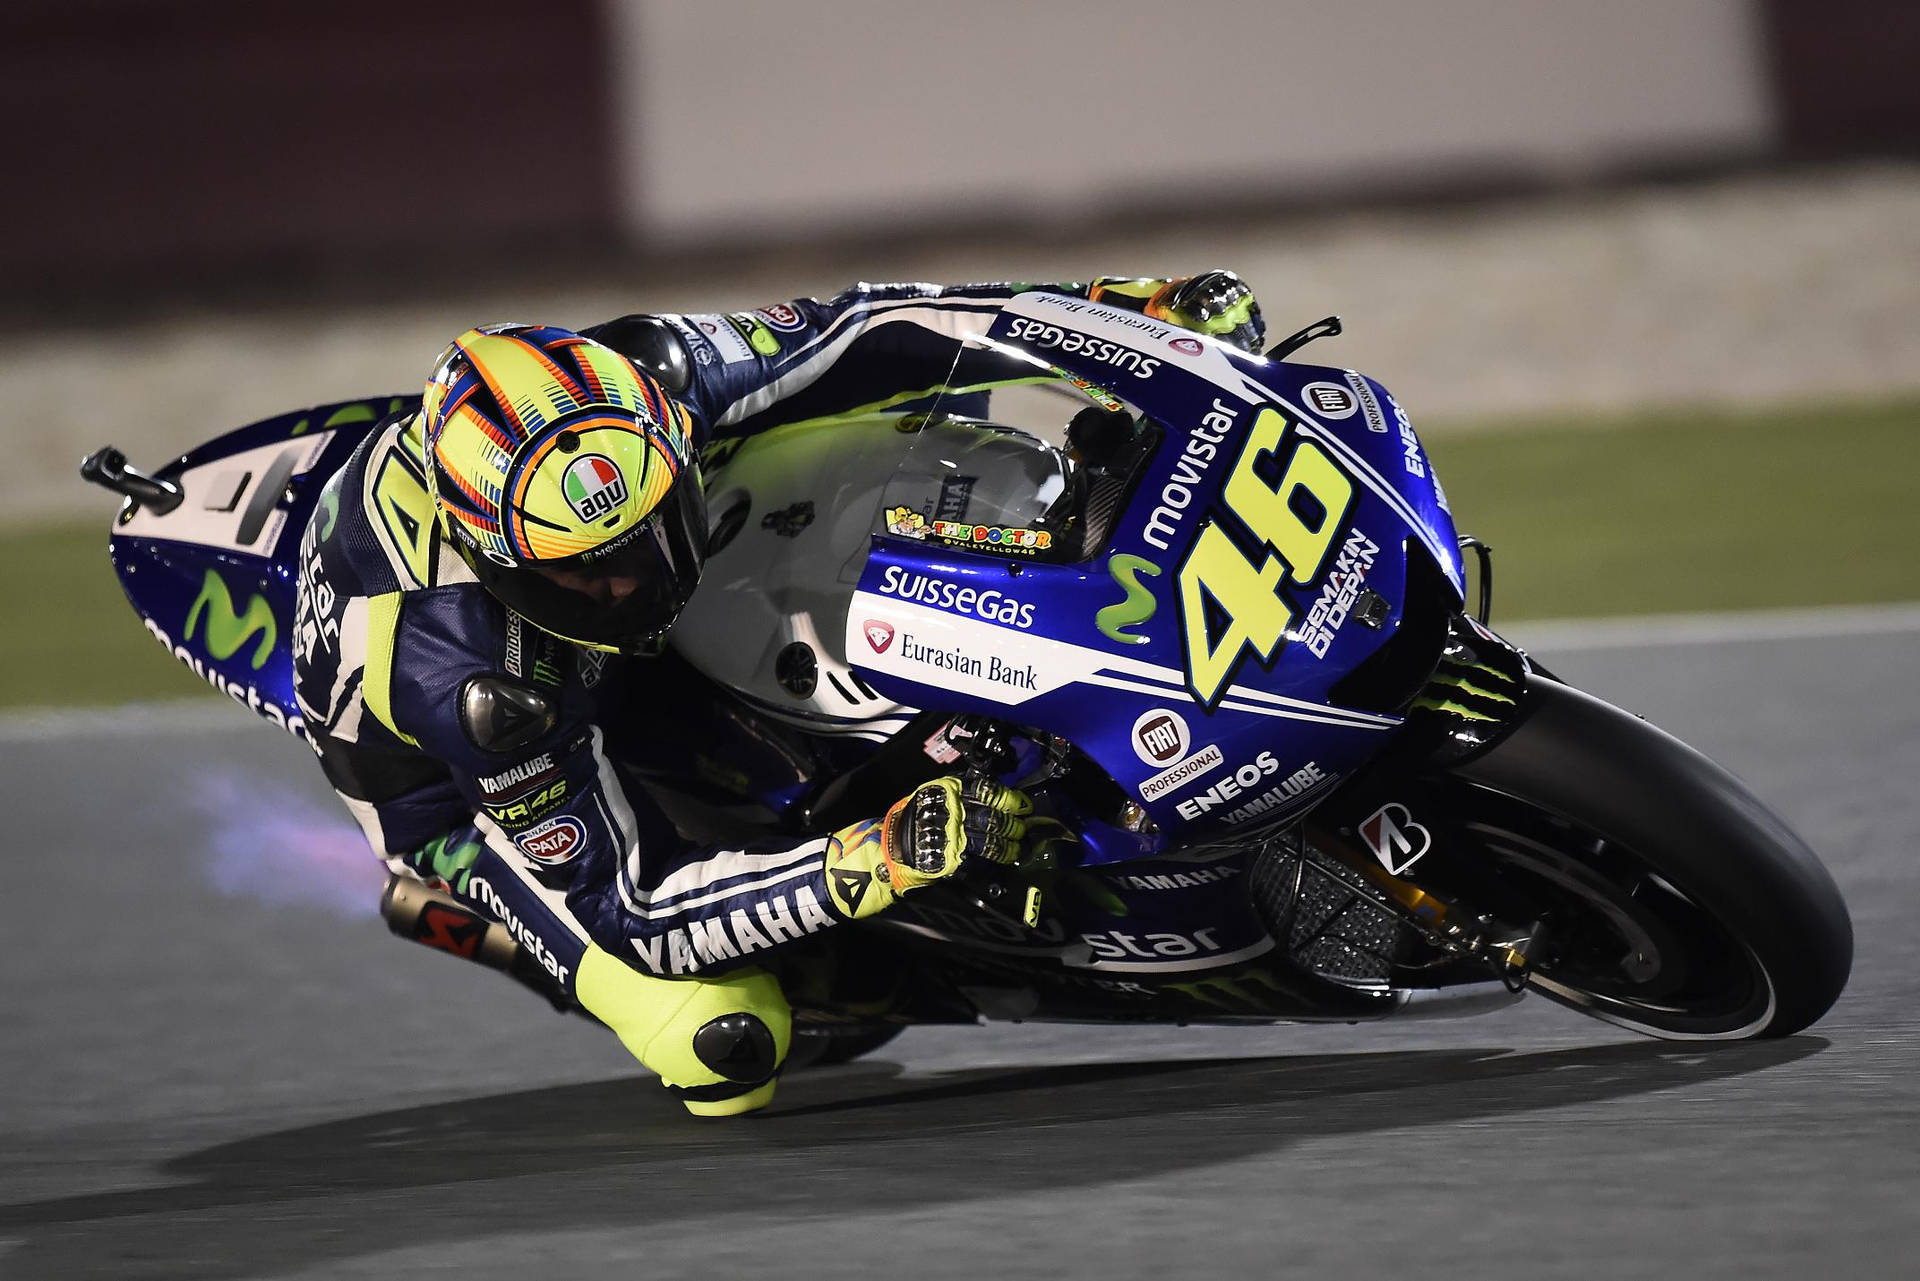 Valentino Rossi, The Legendary Motogp Racer In Action Background